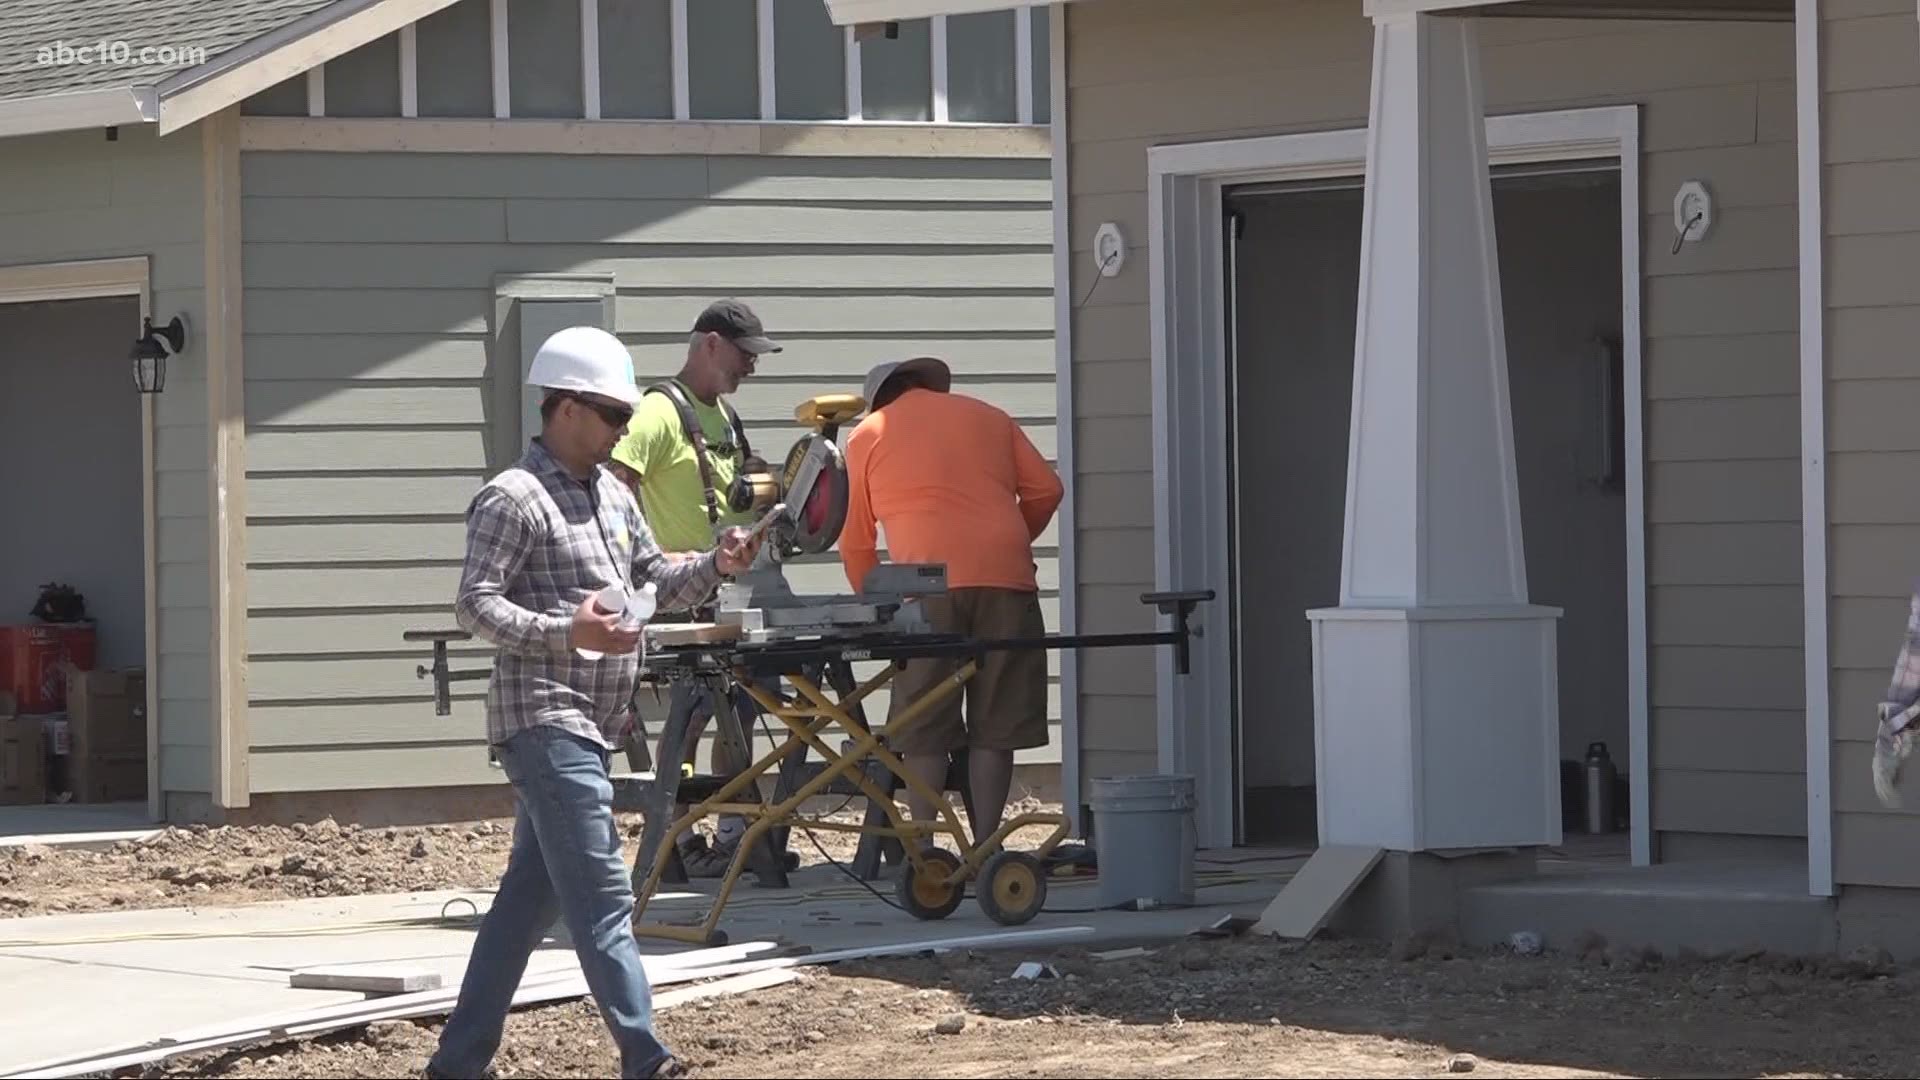 Mike Duffy explains what Habitat for Humanity is and how you may be able to benefit.